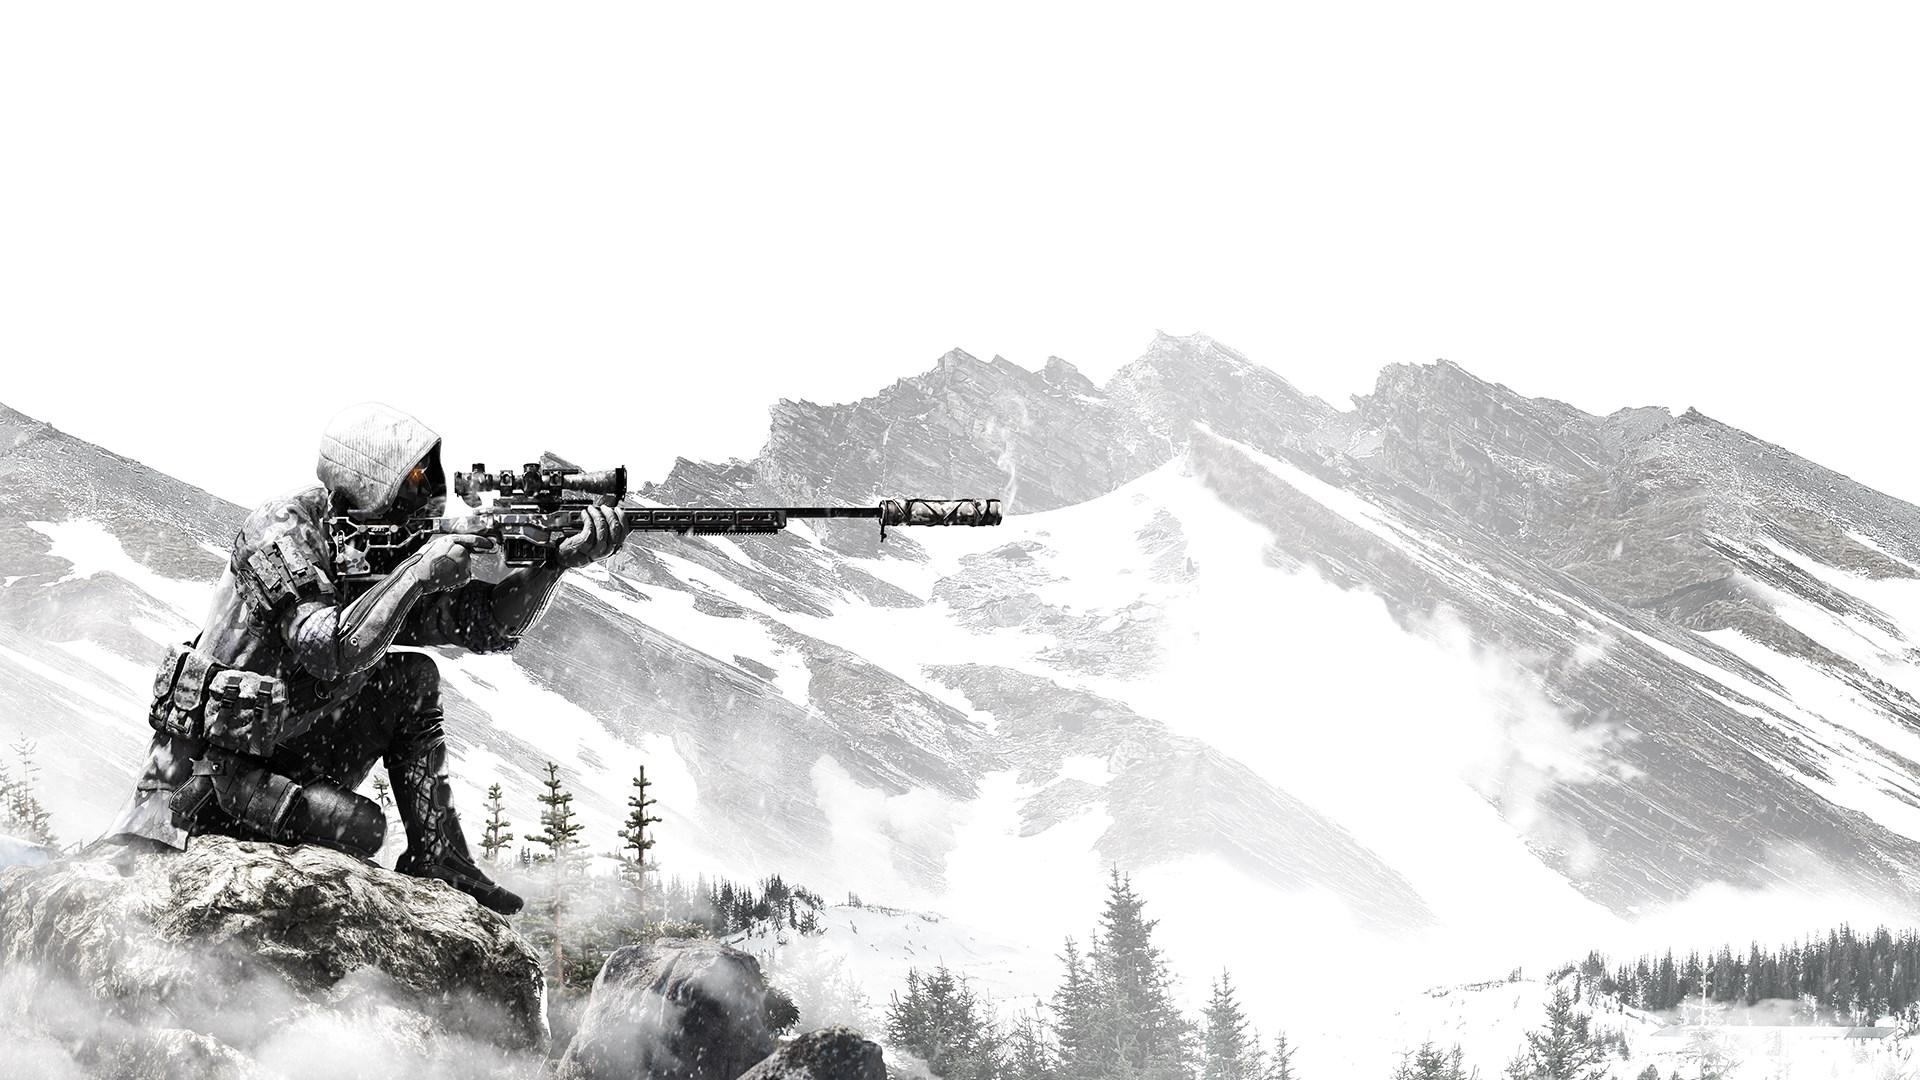 sniper ghost warrior contracts weapons